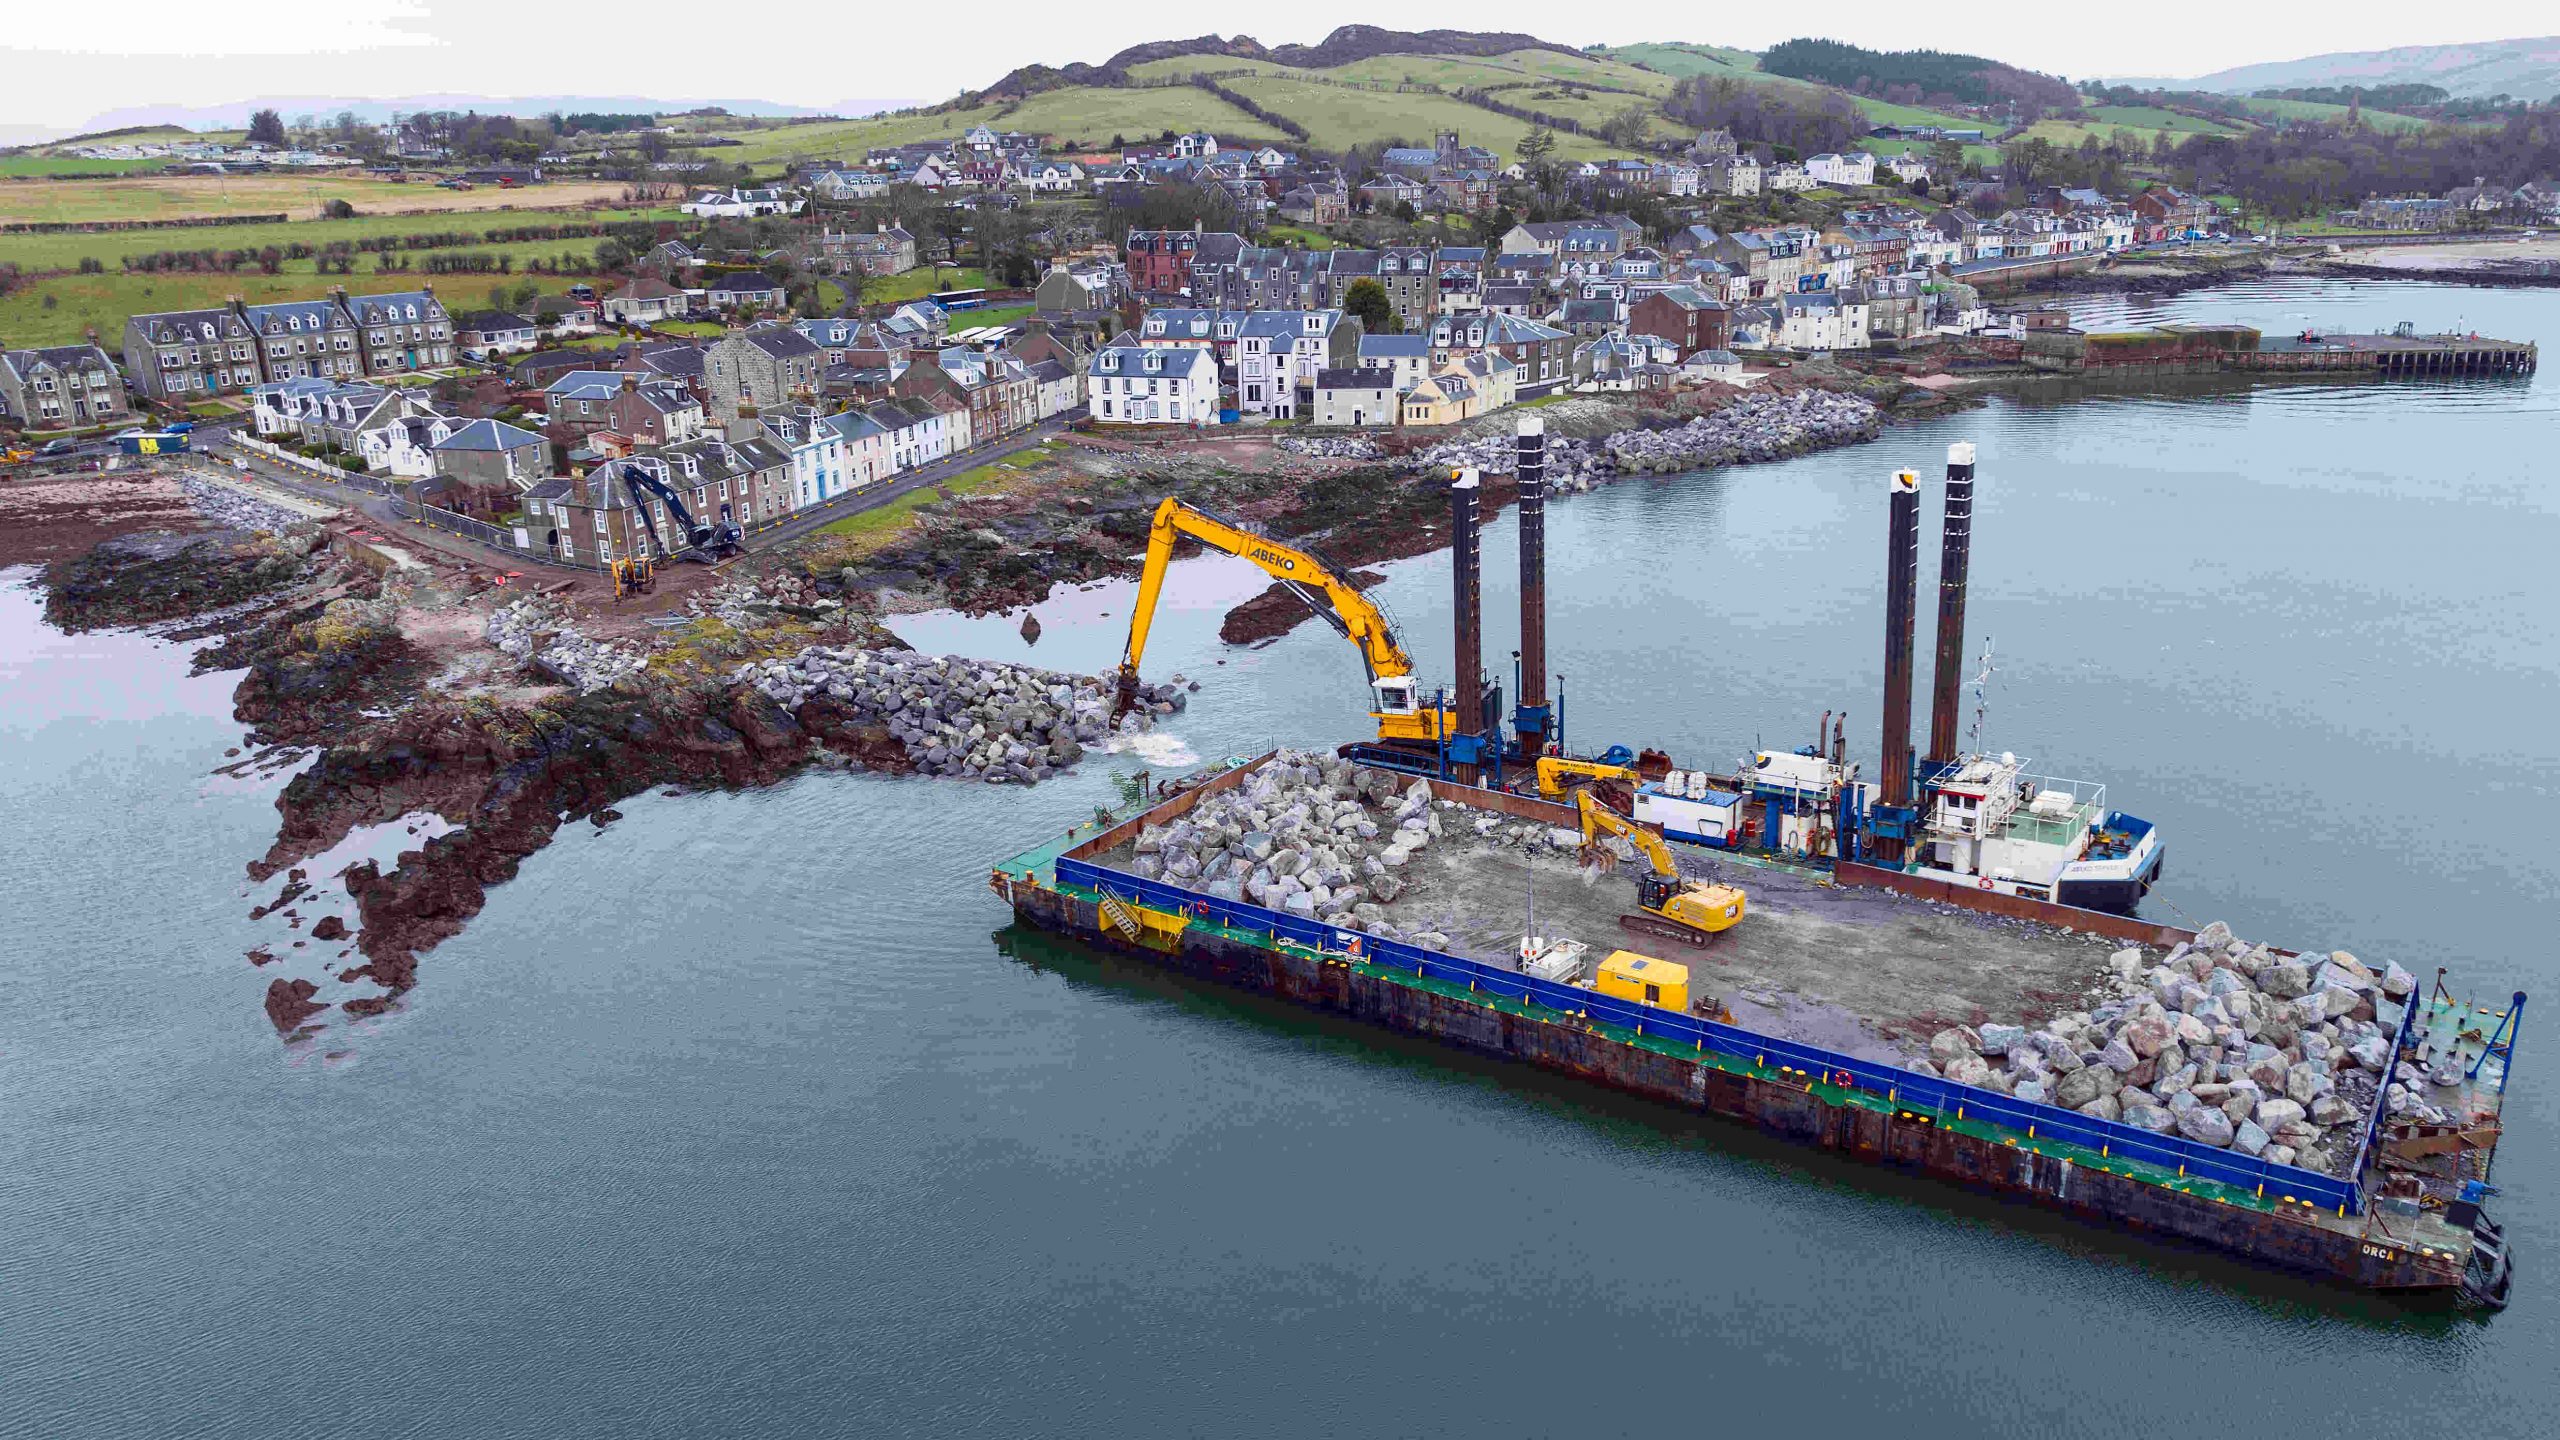 Image showing construction of the Flood Protection Scheme at Millport on Cumbrae